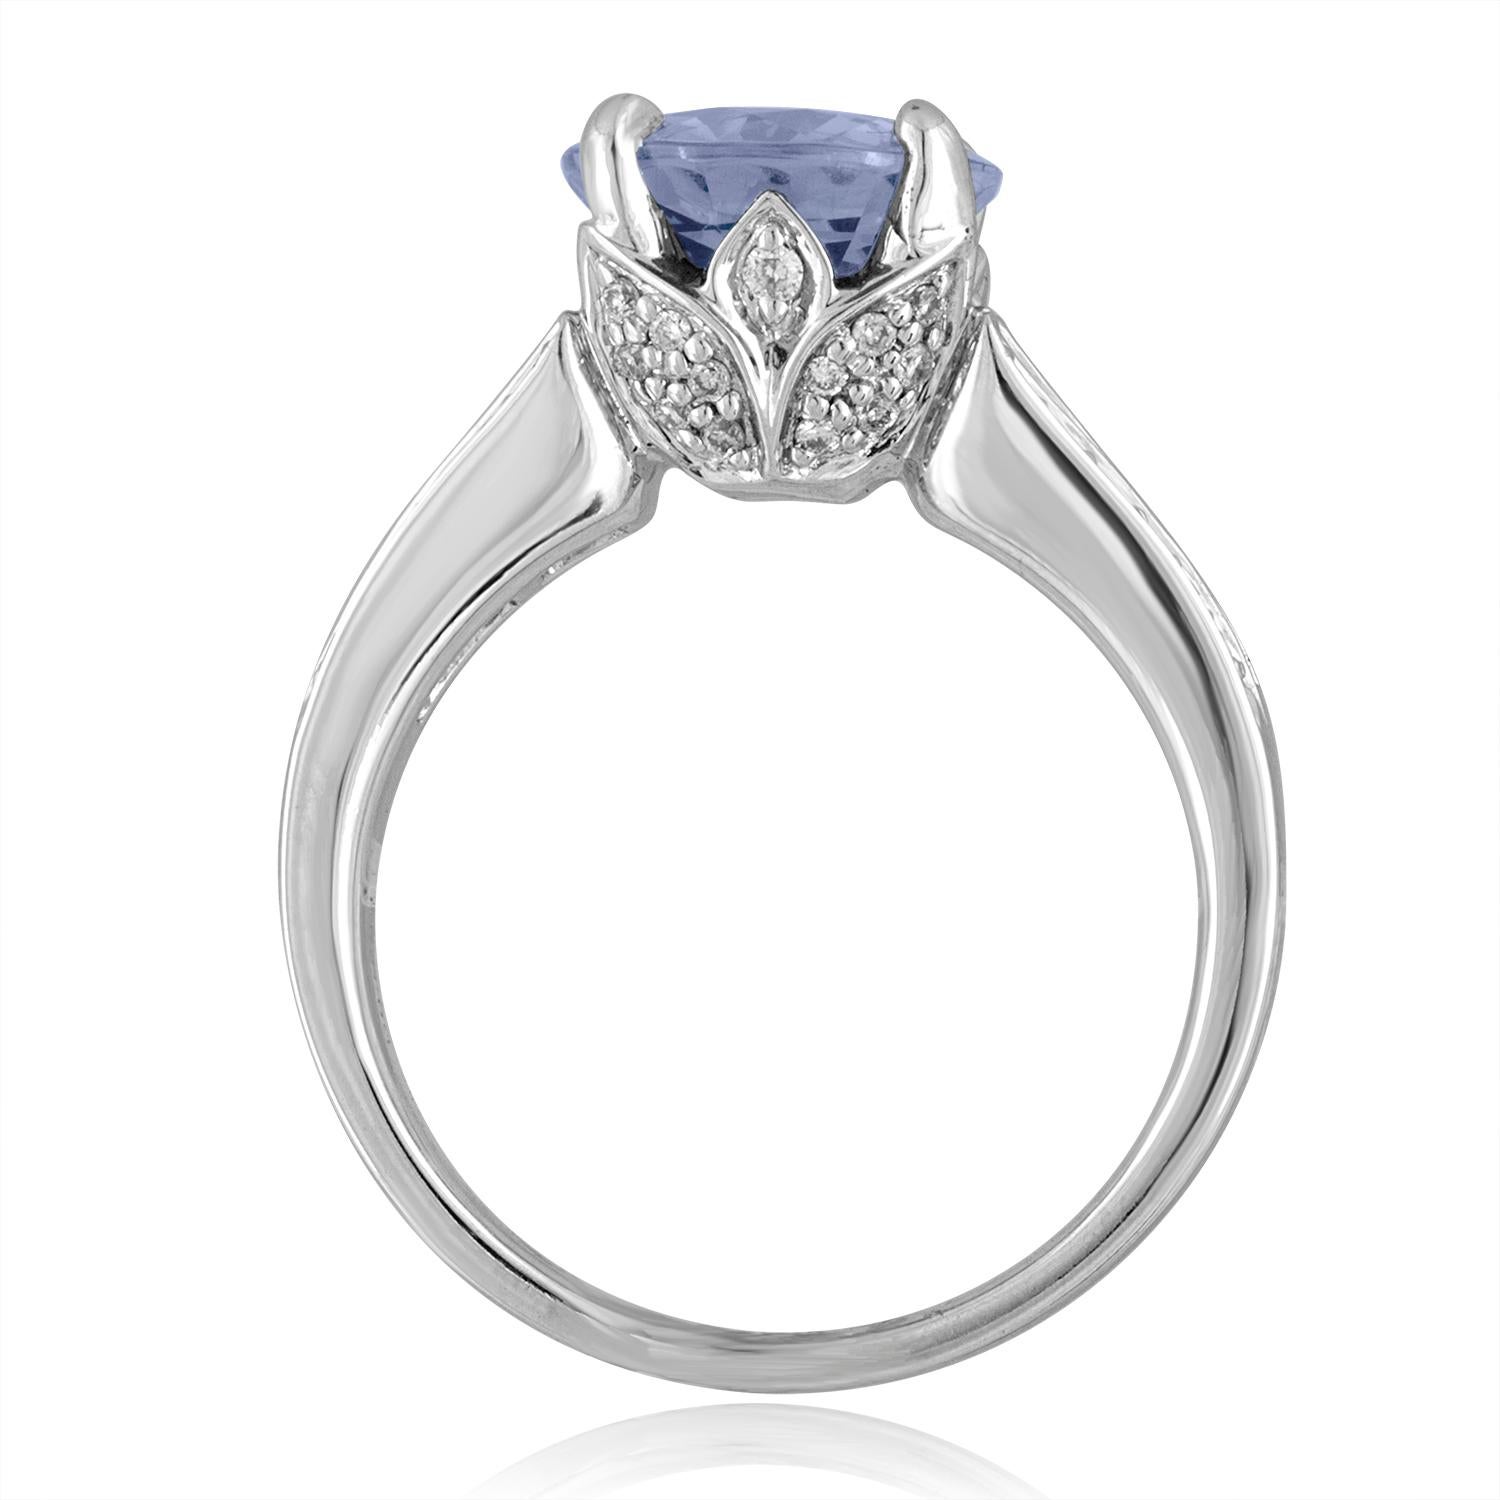 Natural Round Blue Sapphire and Diamond Ring
The ring is 18K White Gold
There 0.88 Carats in Diamonds F/G VS/SI
The Round Blue Sapphire 3.02 Carat NO HEAT
The Sapphire is Certified by LAPIS
The ring is a size 6.75, sizable
The ring weighs 8.1 grams